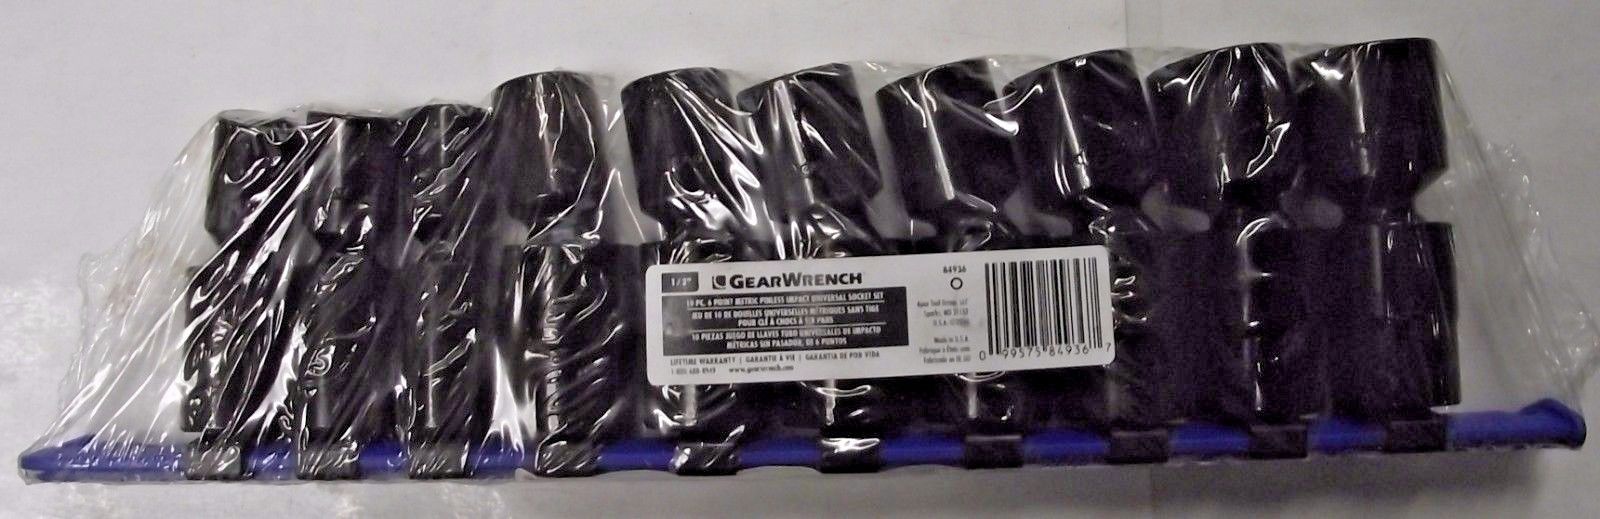 GearWrench 84936 10 Piece 1/2" Drive 6 Point Metric Pinless Impact Universal Soc